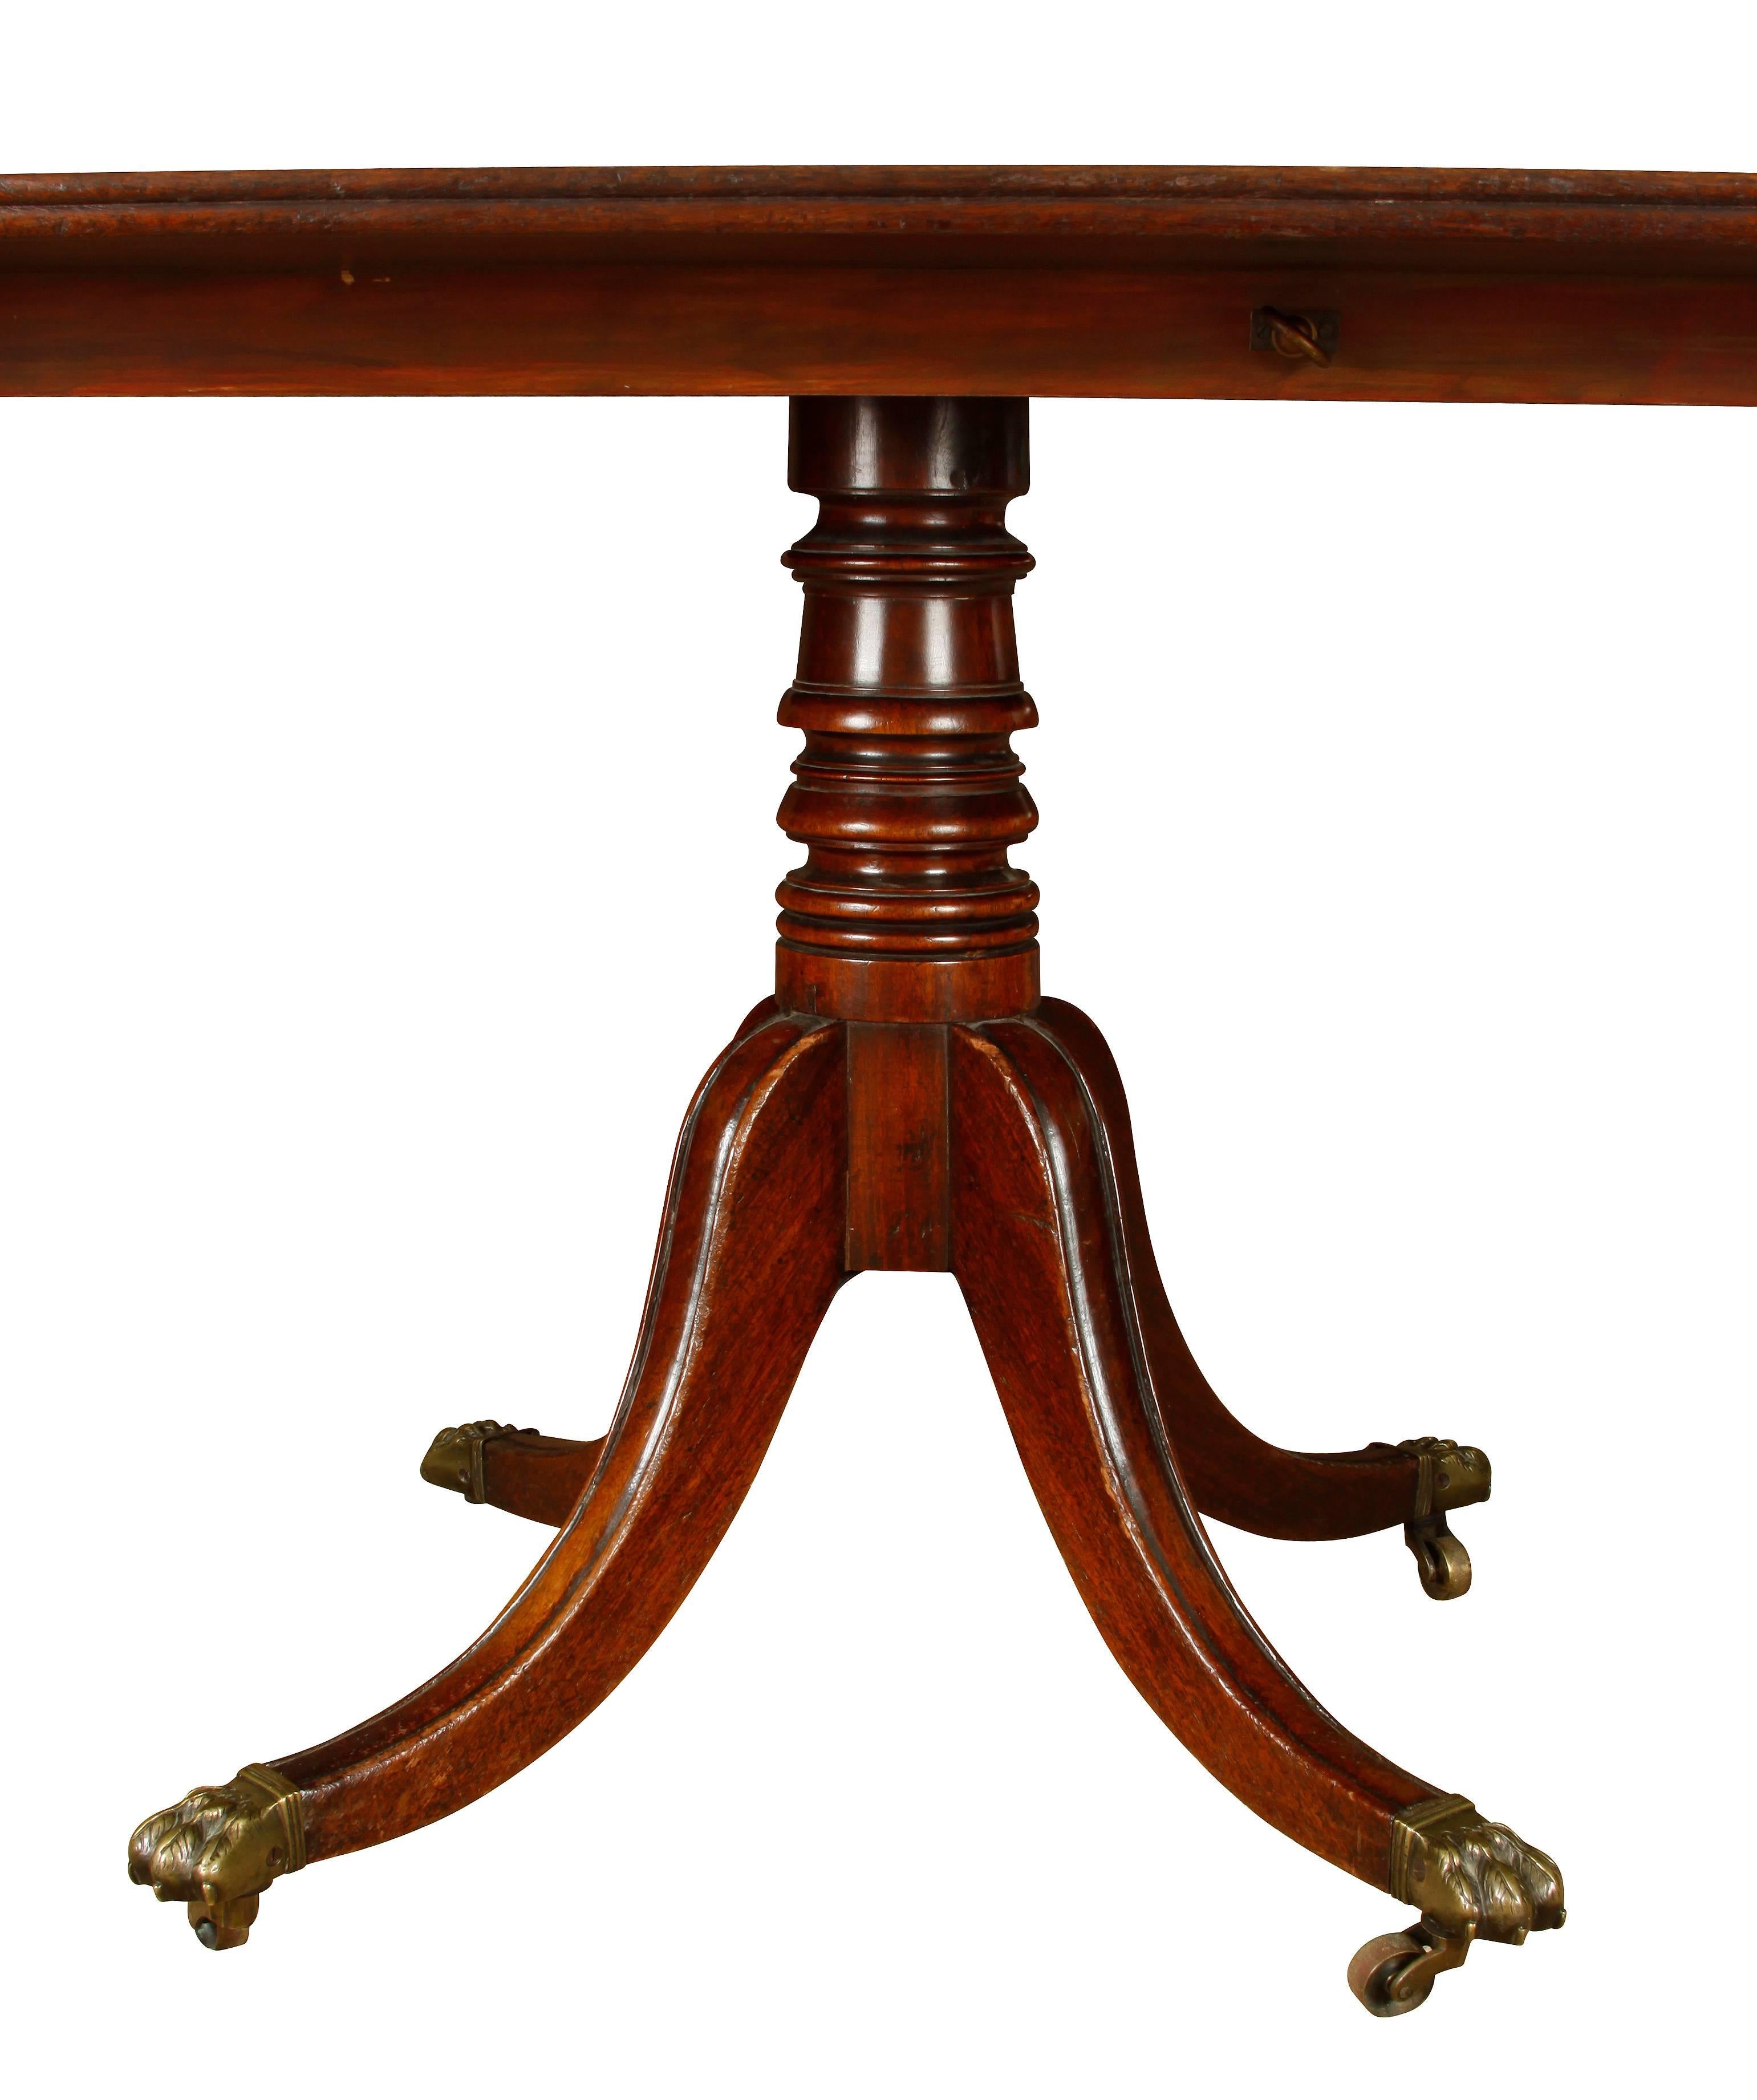 Although some believe that "brown furniture" is out of style, quality and craftsmanship stand the test of time. This English tilt-top mahogany breakfast table is a fine example of premium English furniture. With beautiful details, such as